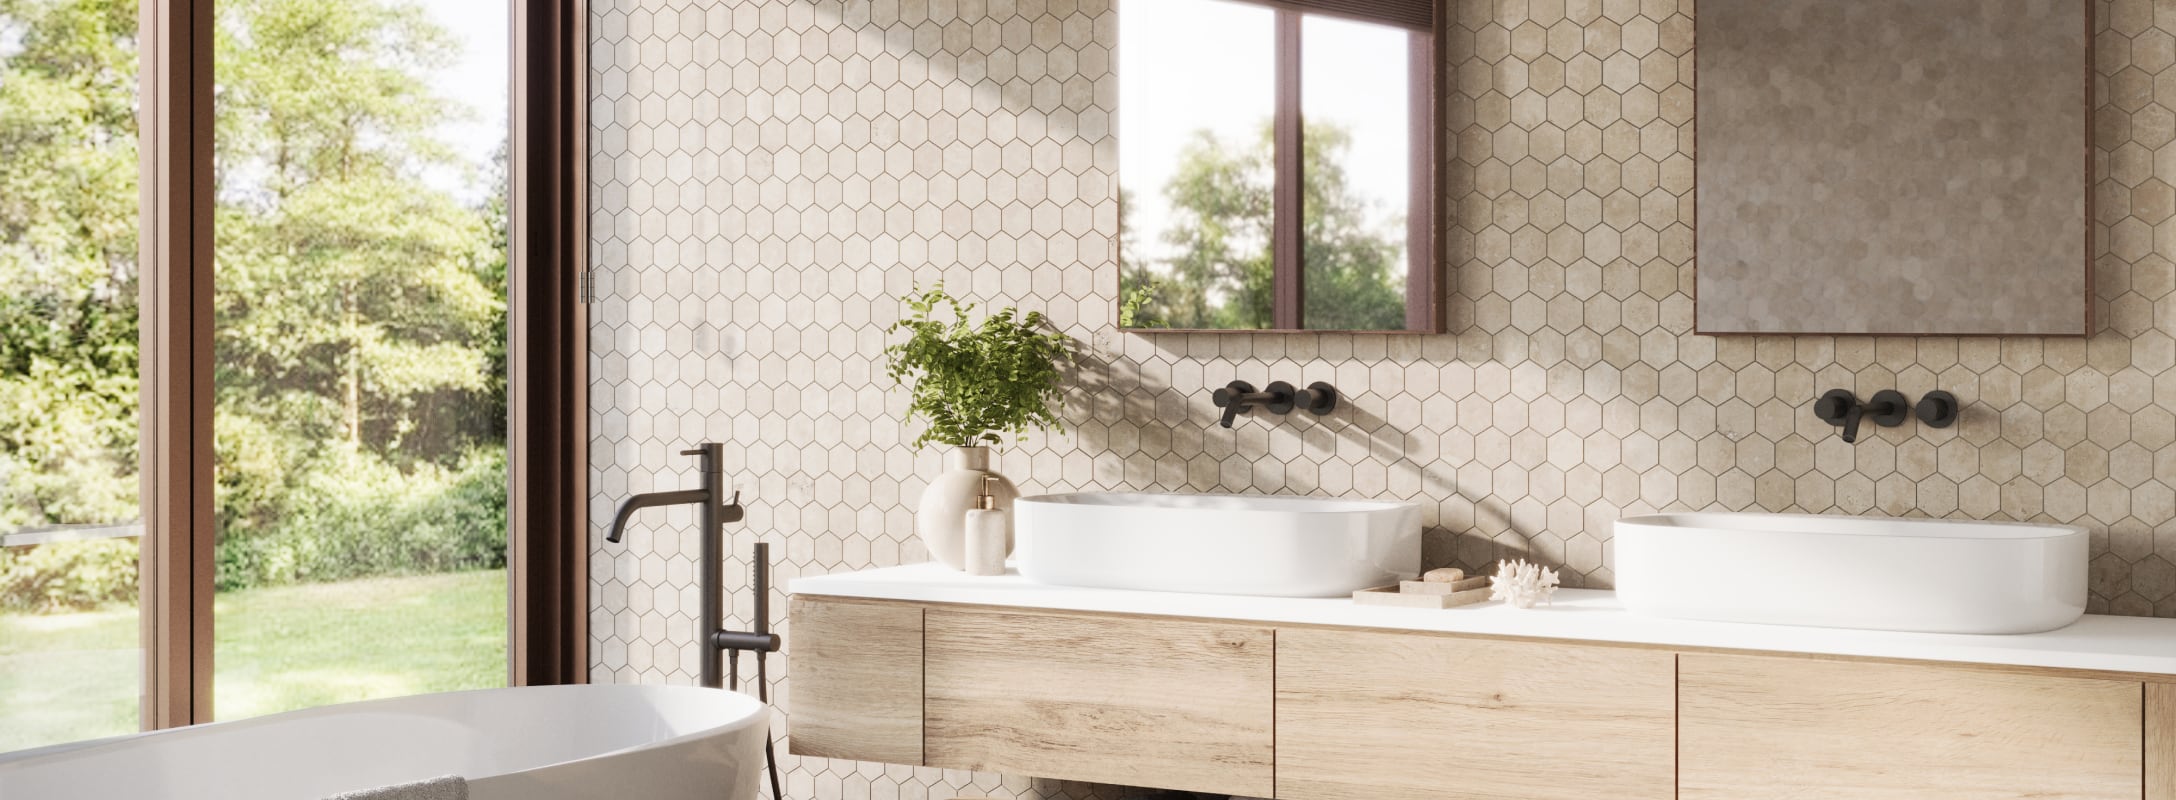 Beige Tiles with a luxury hex mosaic design elevate bathroom elegance, blending style and sophistication.